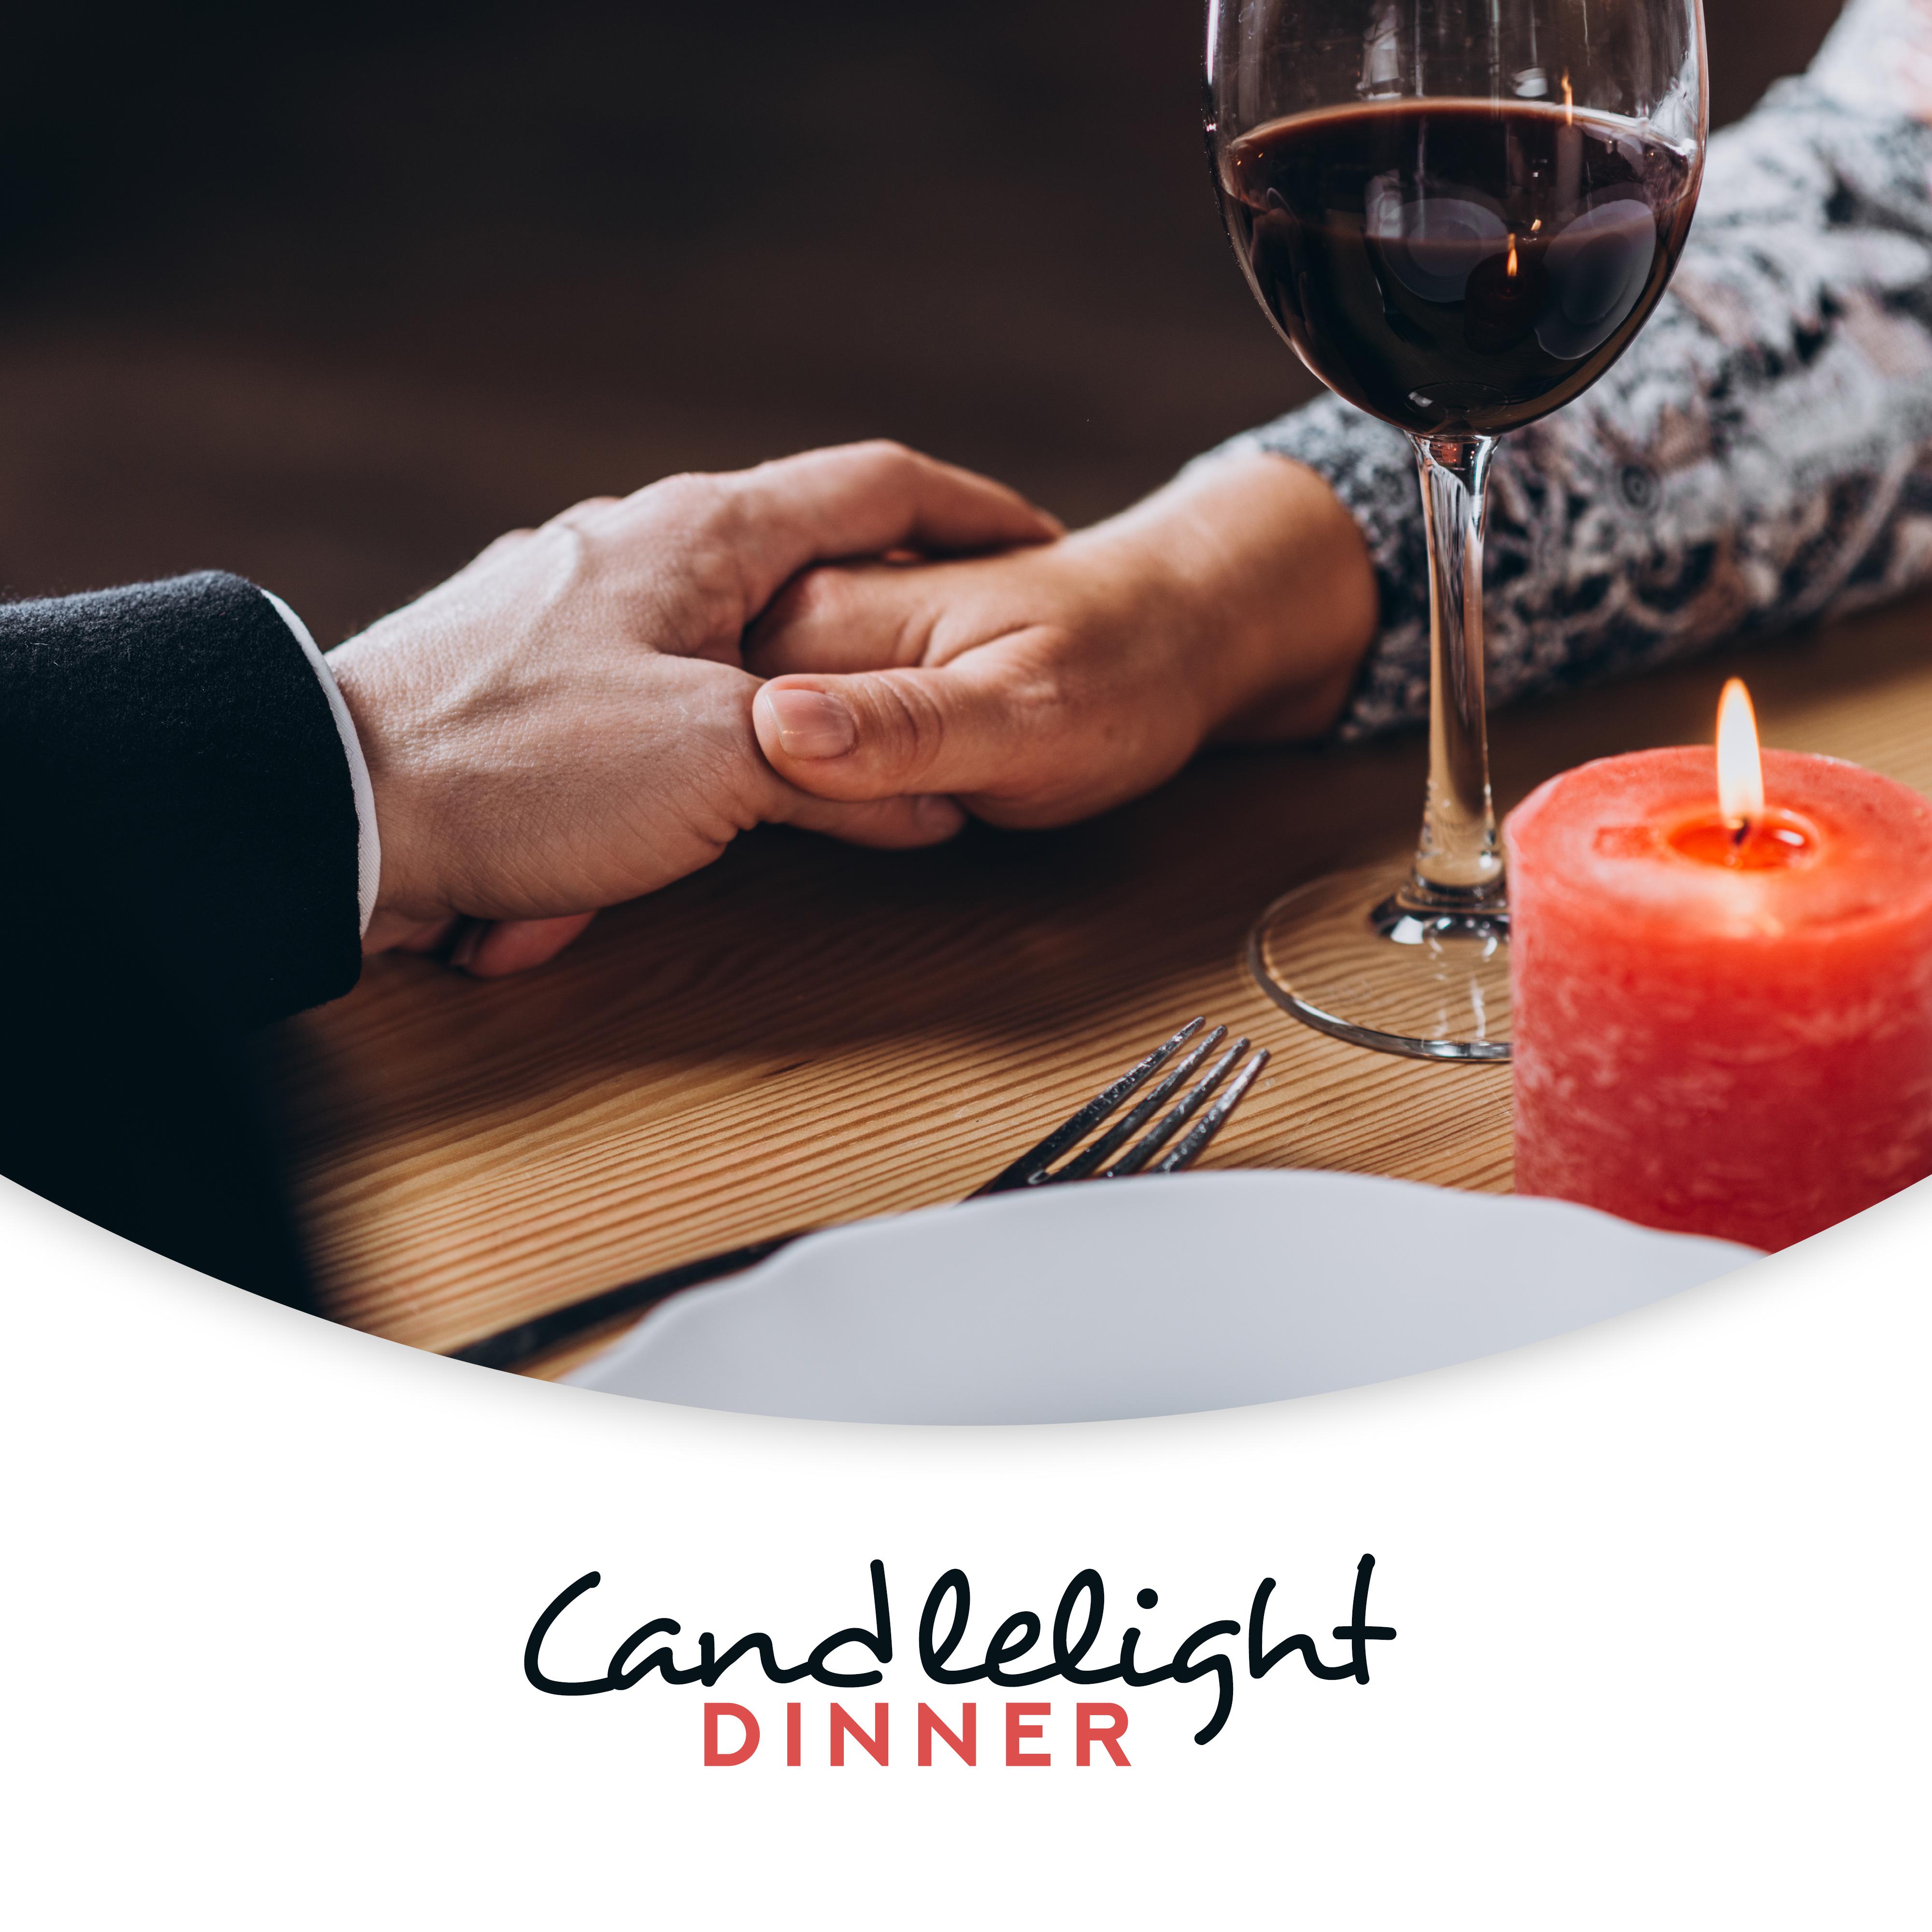 Candlelight Dinner - Romantic Piano Arrangements for a Romantic Dinner for Two